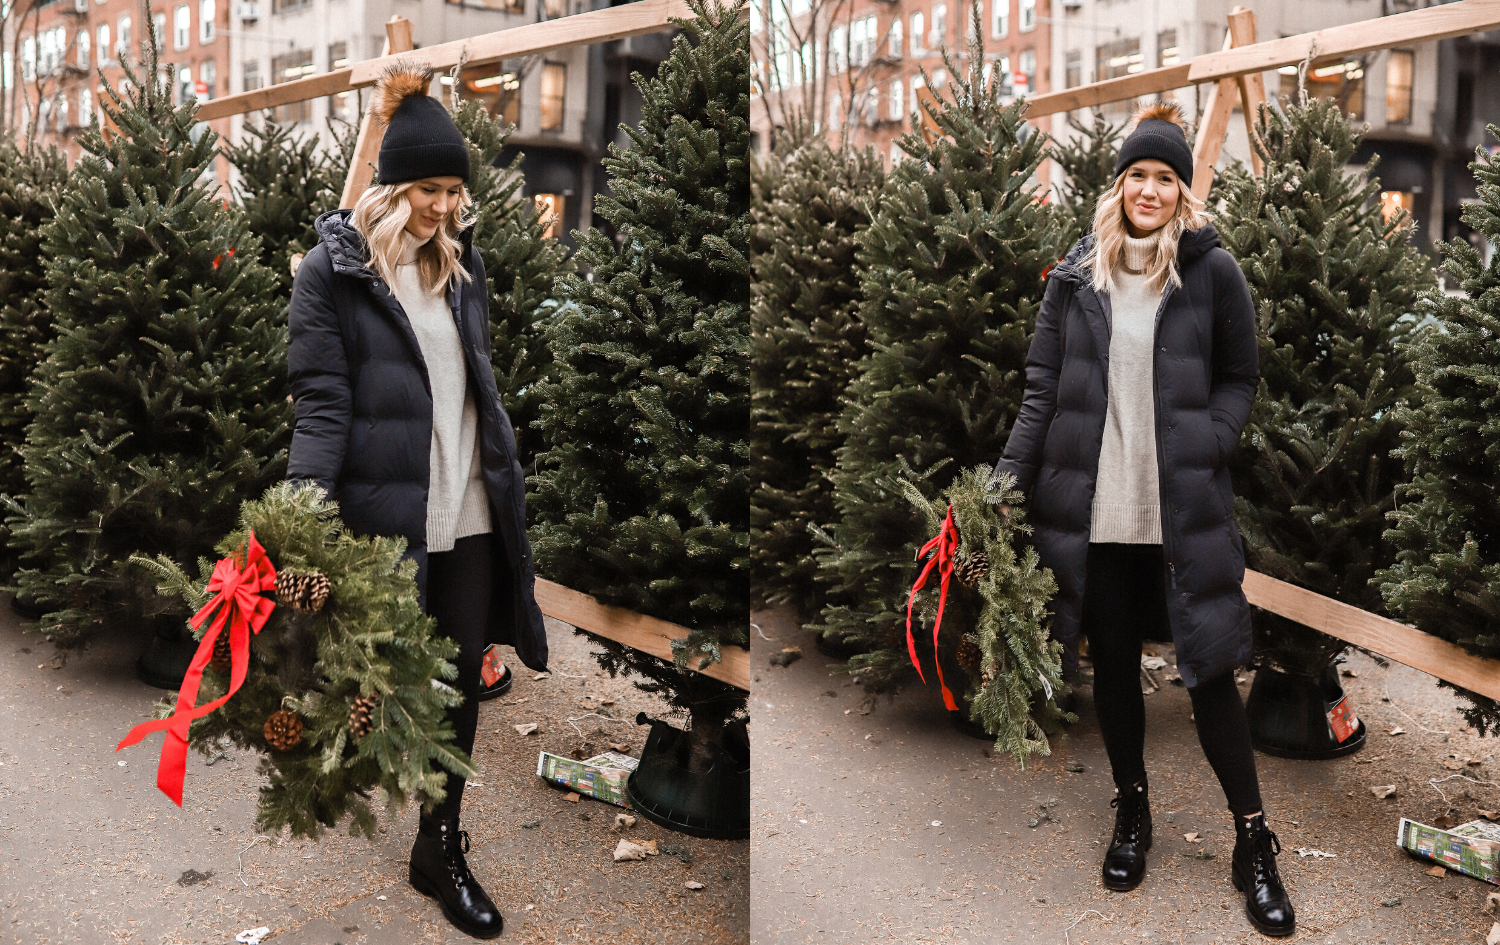 Anna getting a real Christmas tree in New York City.